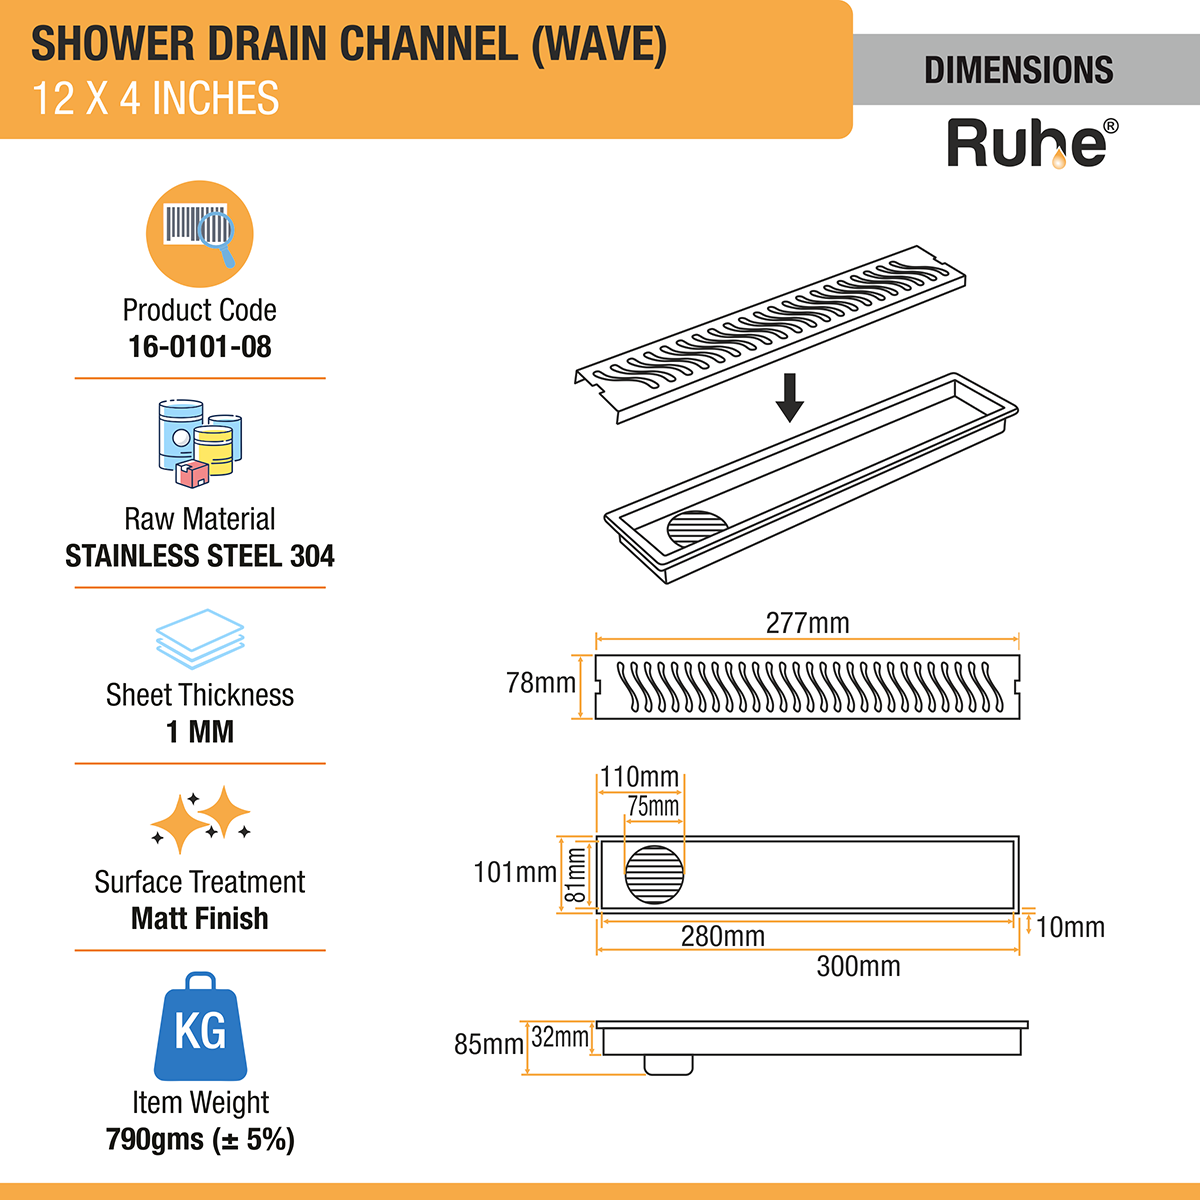 Wave Shower Drain Channel (12 X 4 Inches) with Cockroach Trap (304 Grade) dimensions and size